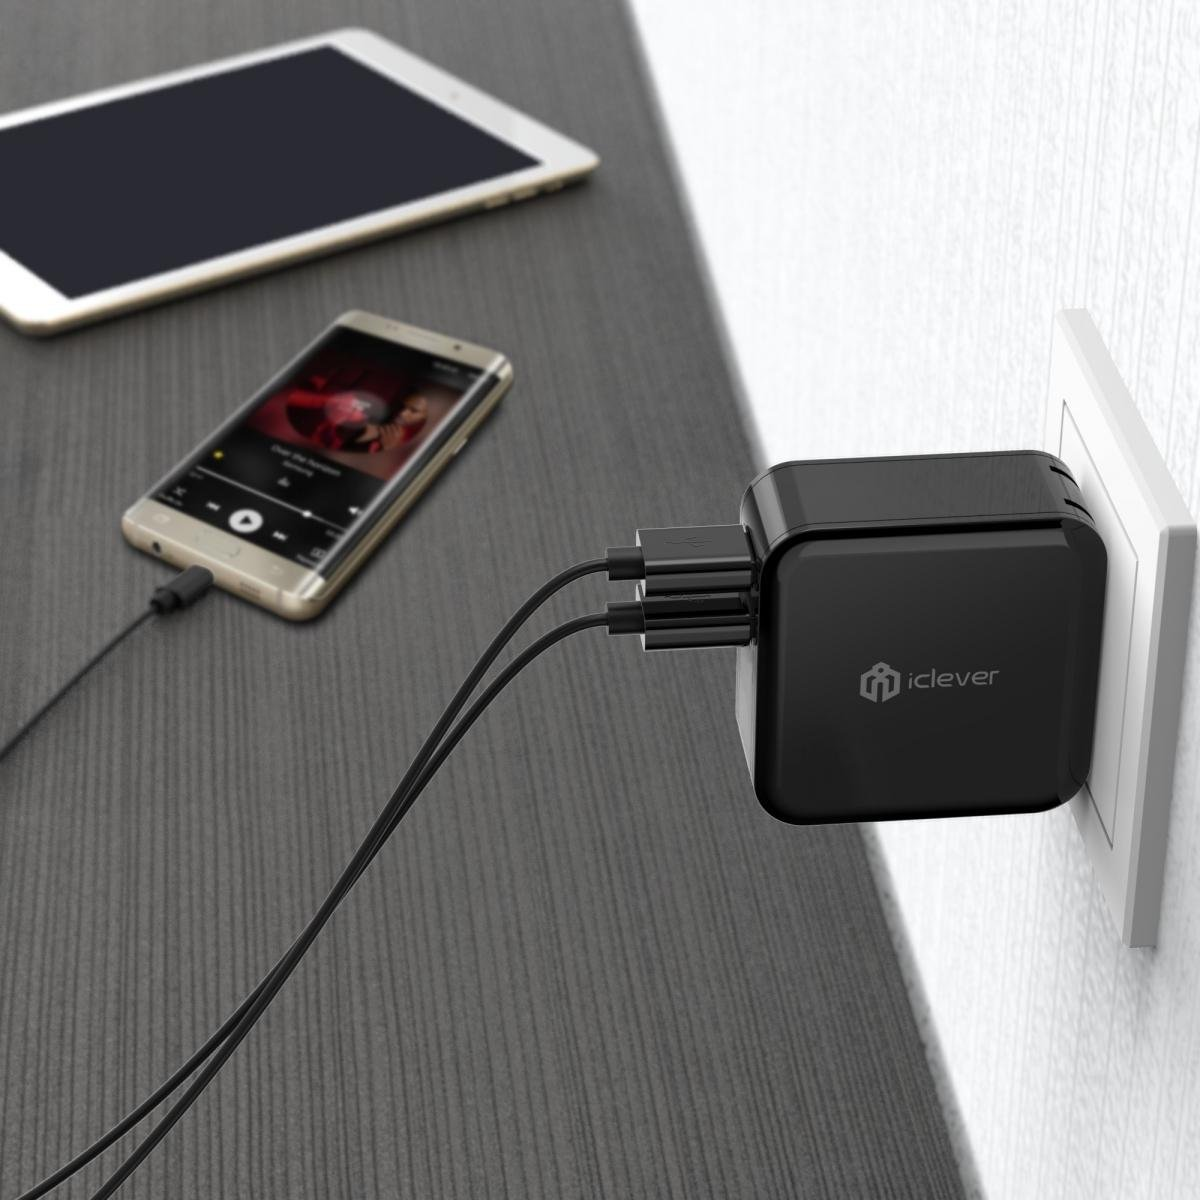 iClever Boost Cube Dual USB Wall Charger Only $13.99 on Amazon!